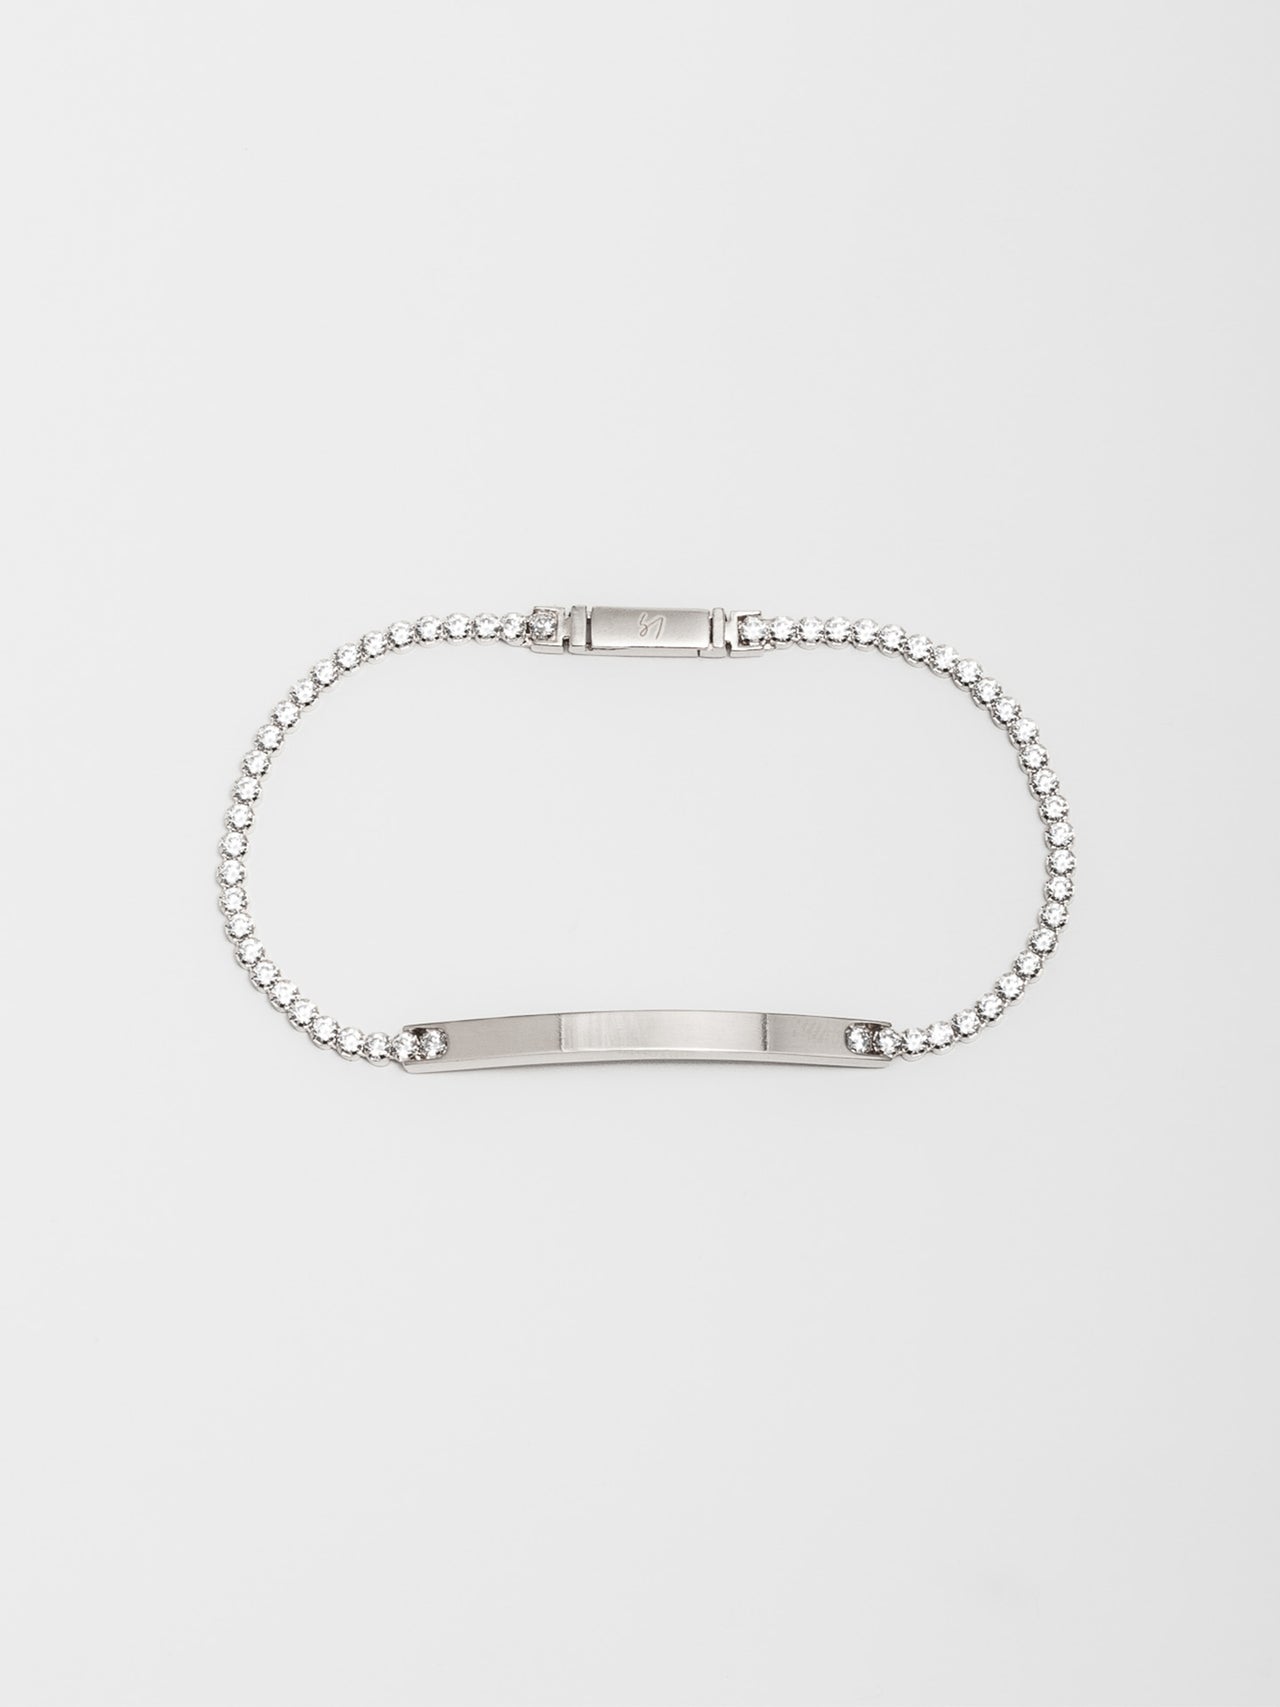 Sterling Silver ID Tennis Bracelet  pictured on light grey background